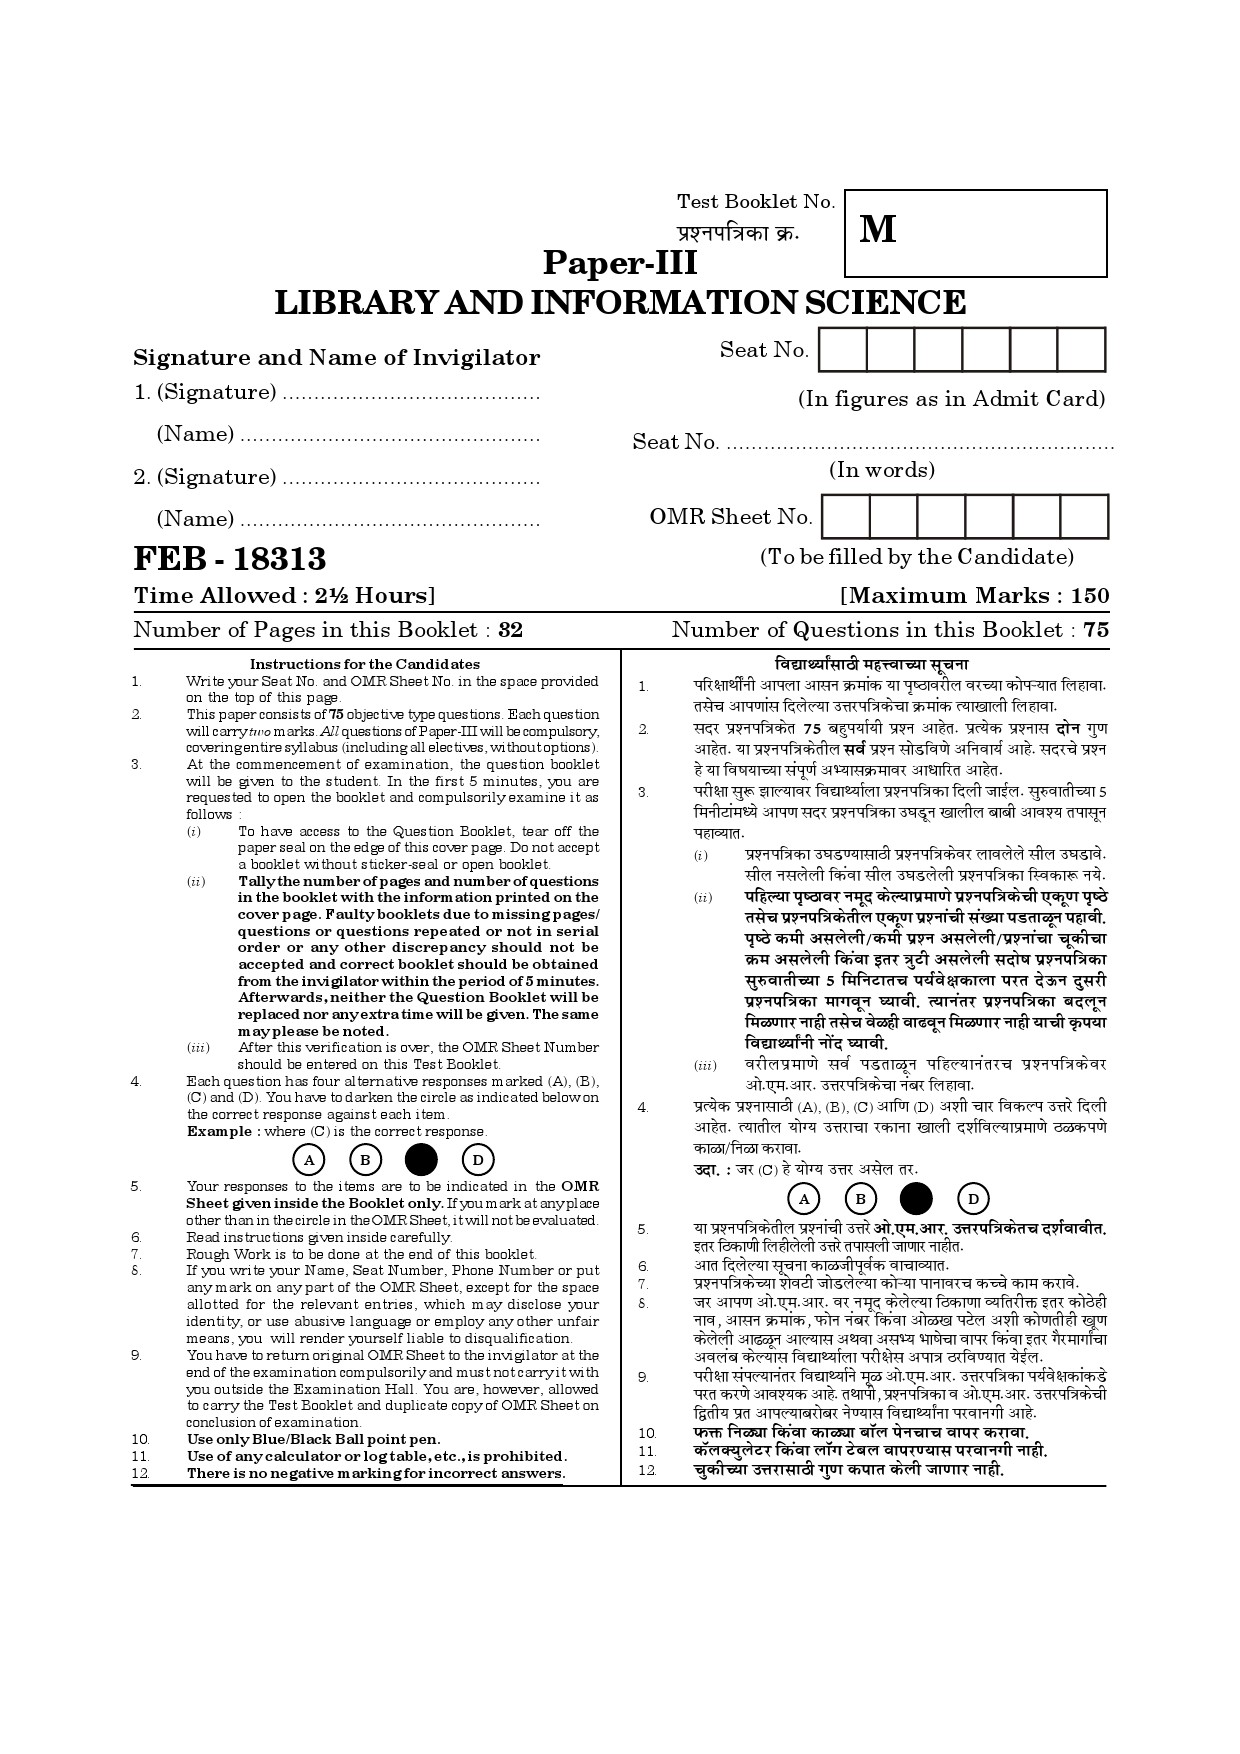 Maharashtra SET Library Information Science Question Paper III February 2013 30